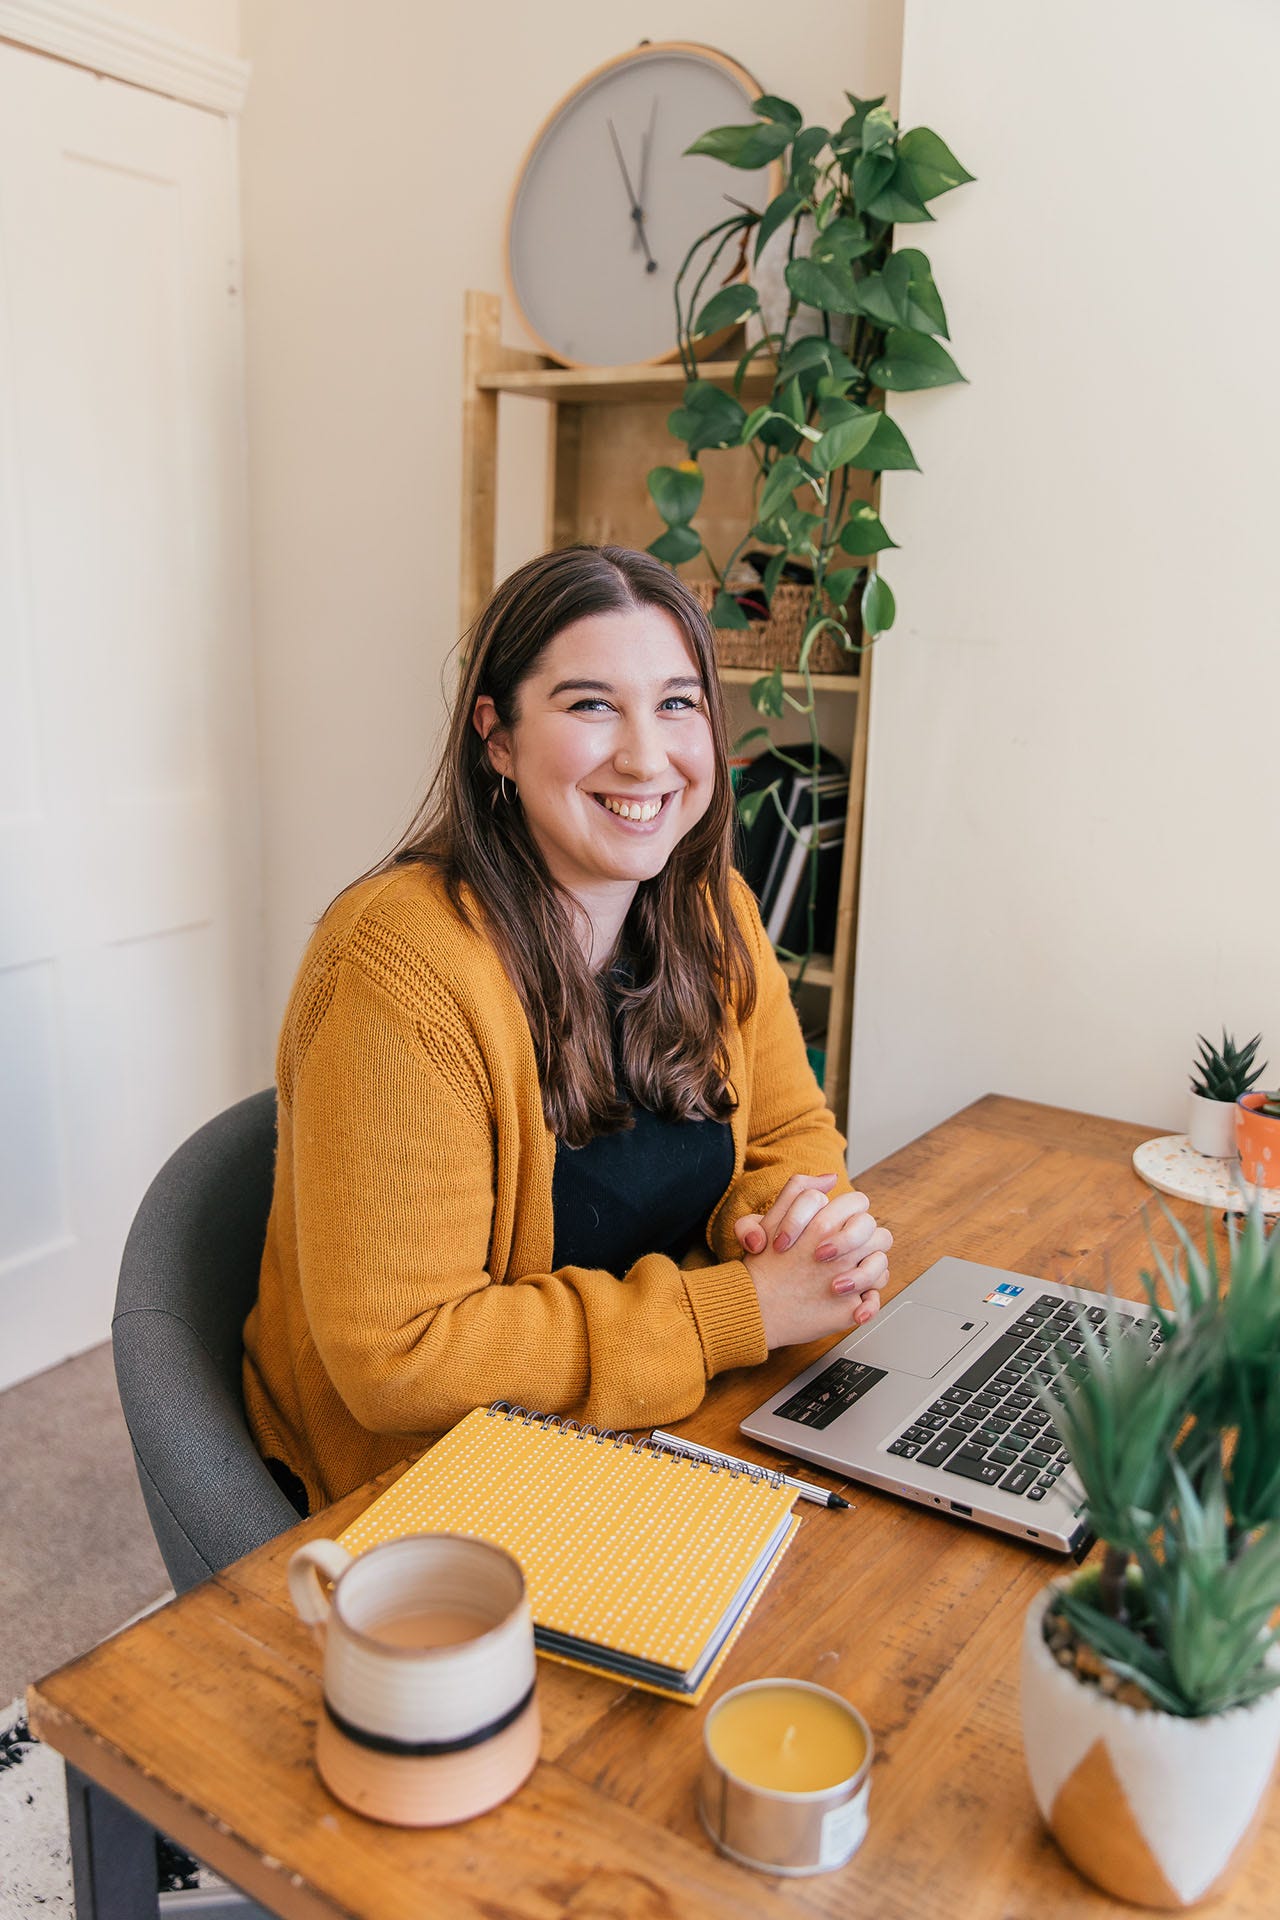 Rachel Baker, AKA The Ethical Copywriter, sits at a wooden desk. There is a laptop in front of her, and a yellow notebook, cup of coffee, yellow candle and plant to her right. There are several smaller plants to her left. She is looking at the camera and smiling. 